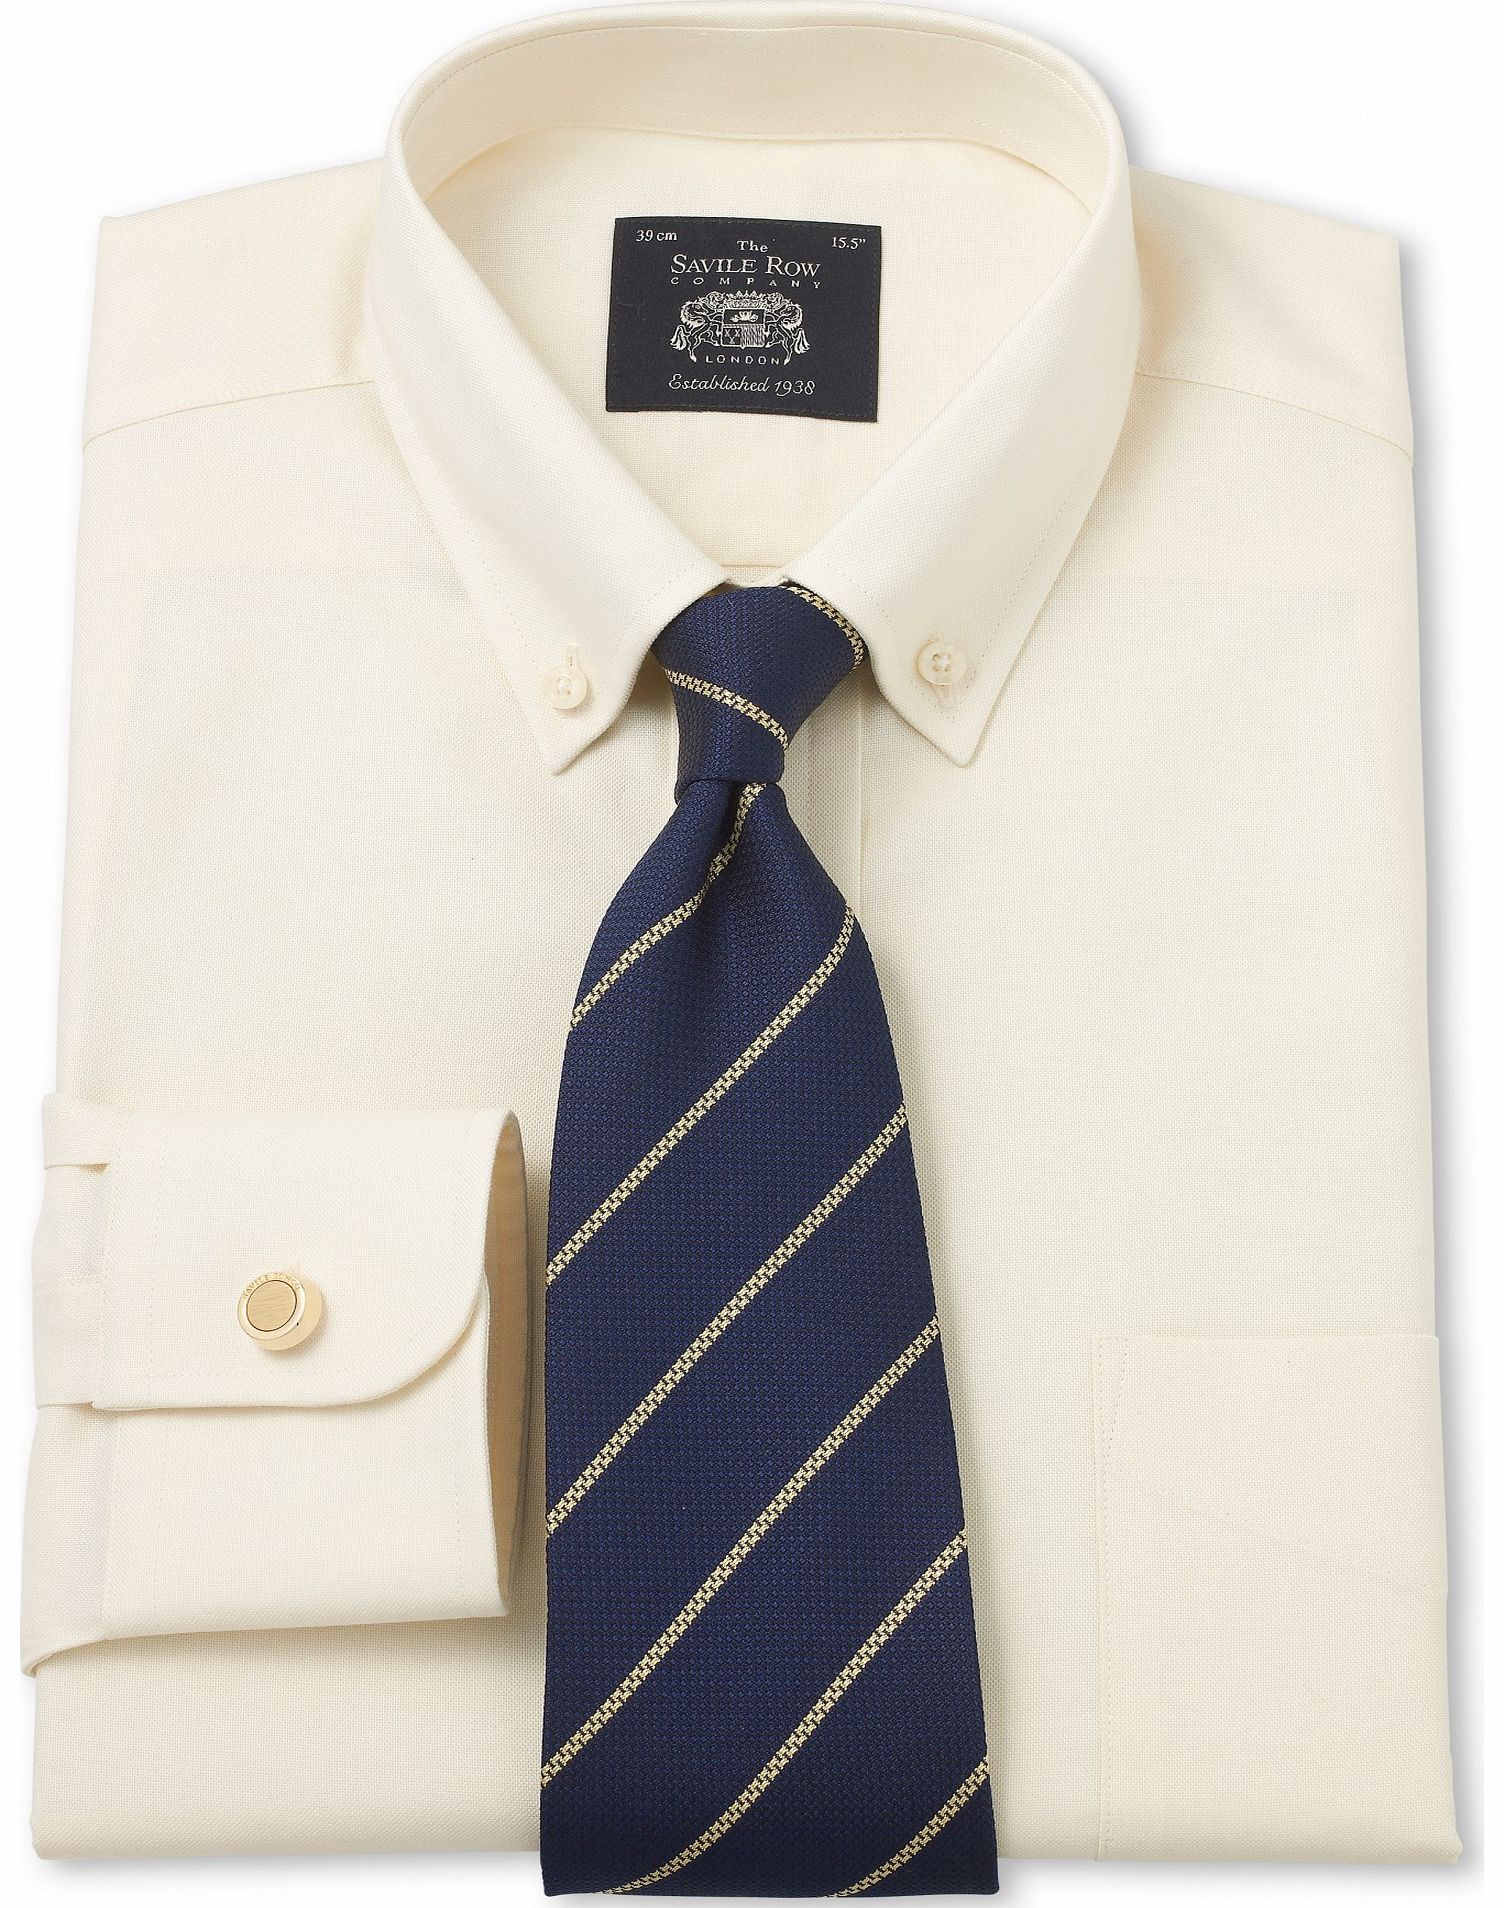 Savile Row Company Cream Pinpoint Classic Fit Shirt 19 1/2``